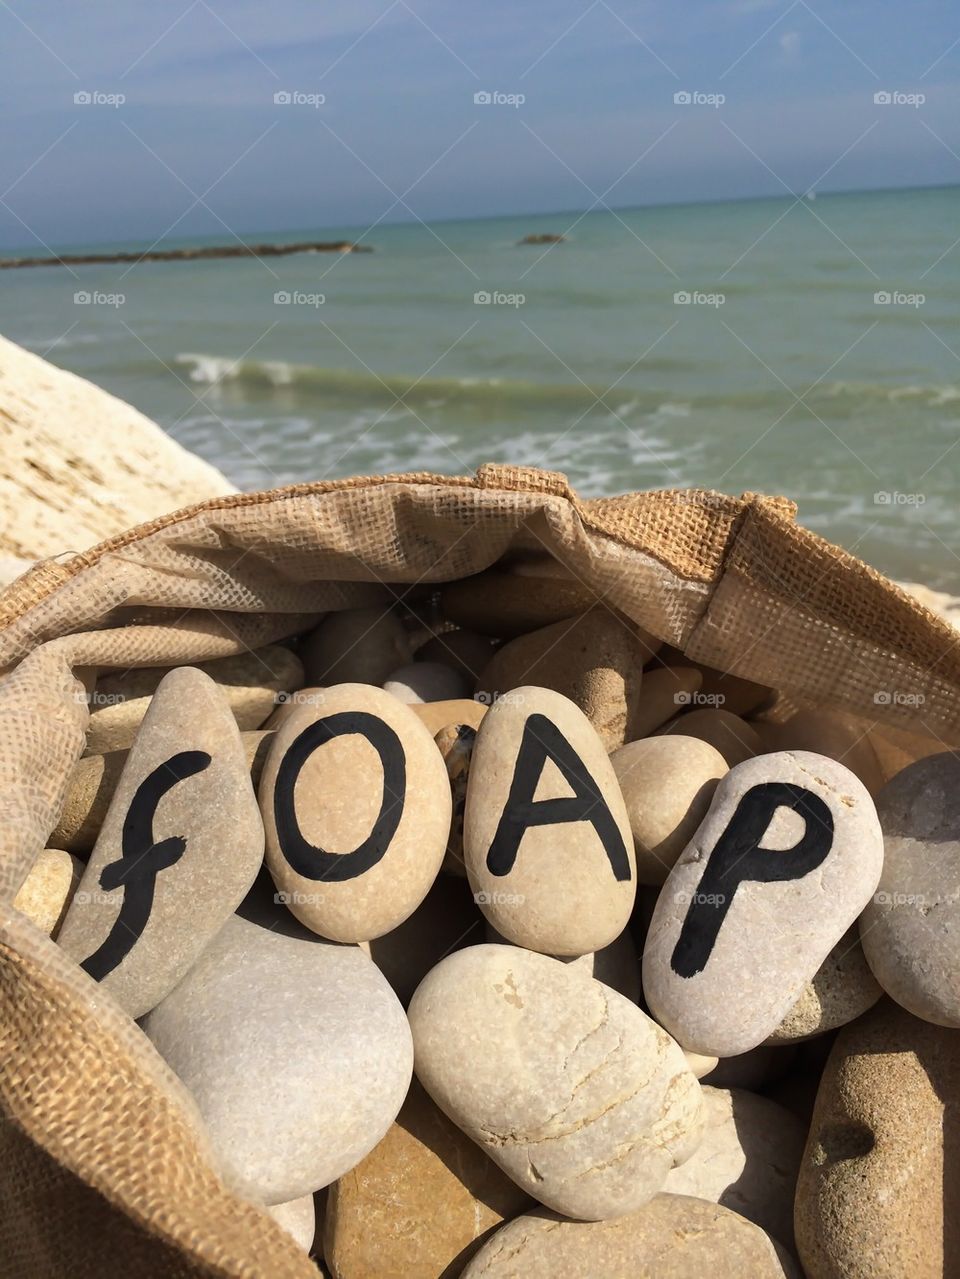 Foap word with many stones in a bag